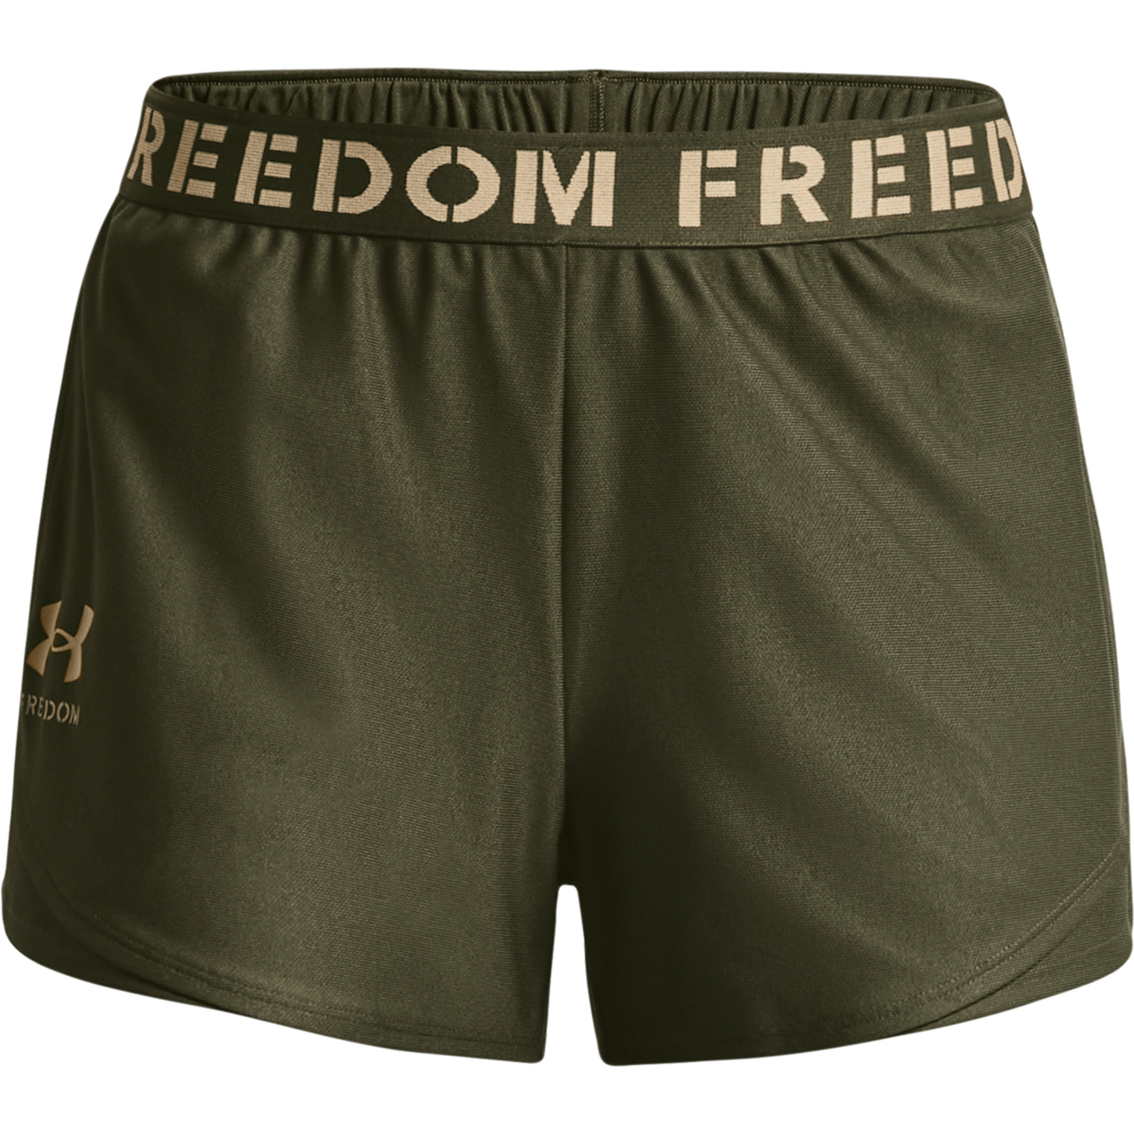 Under Armour Freedom Play Up Shorts - Image 4 of 6